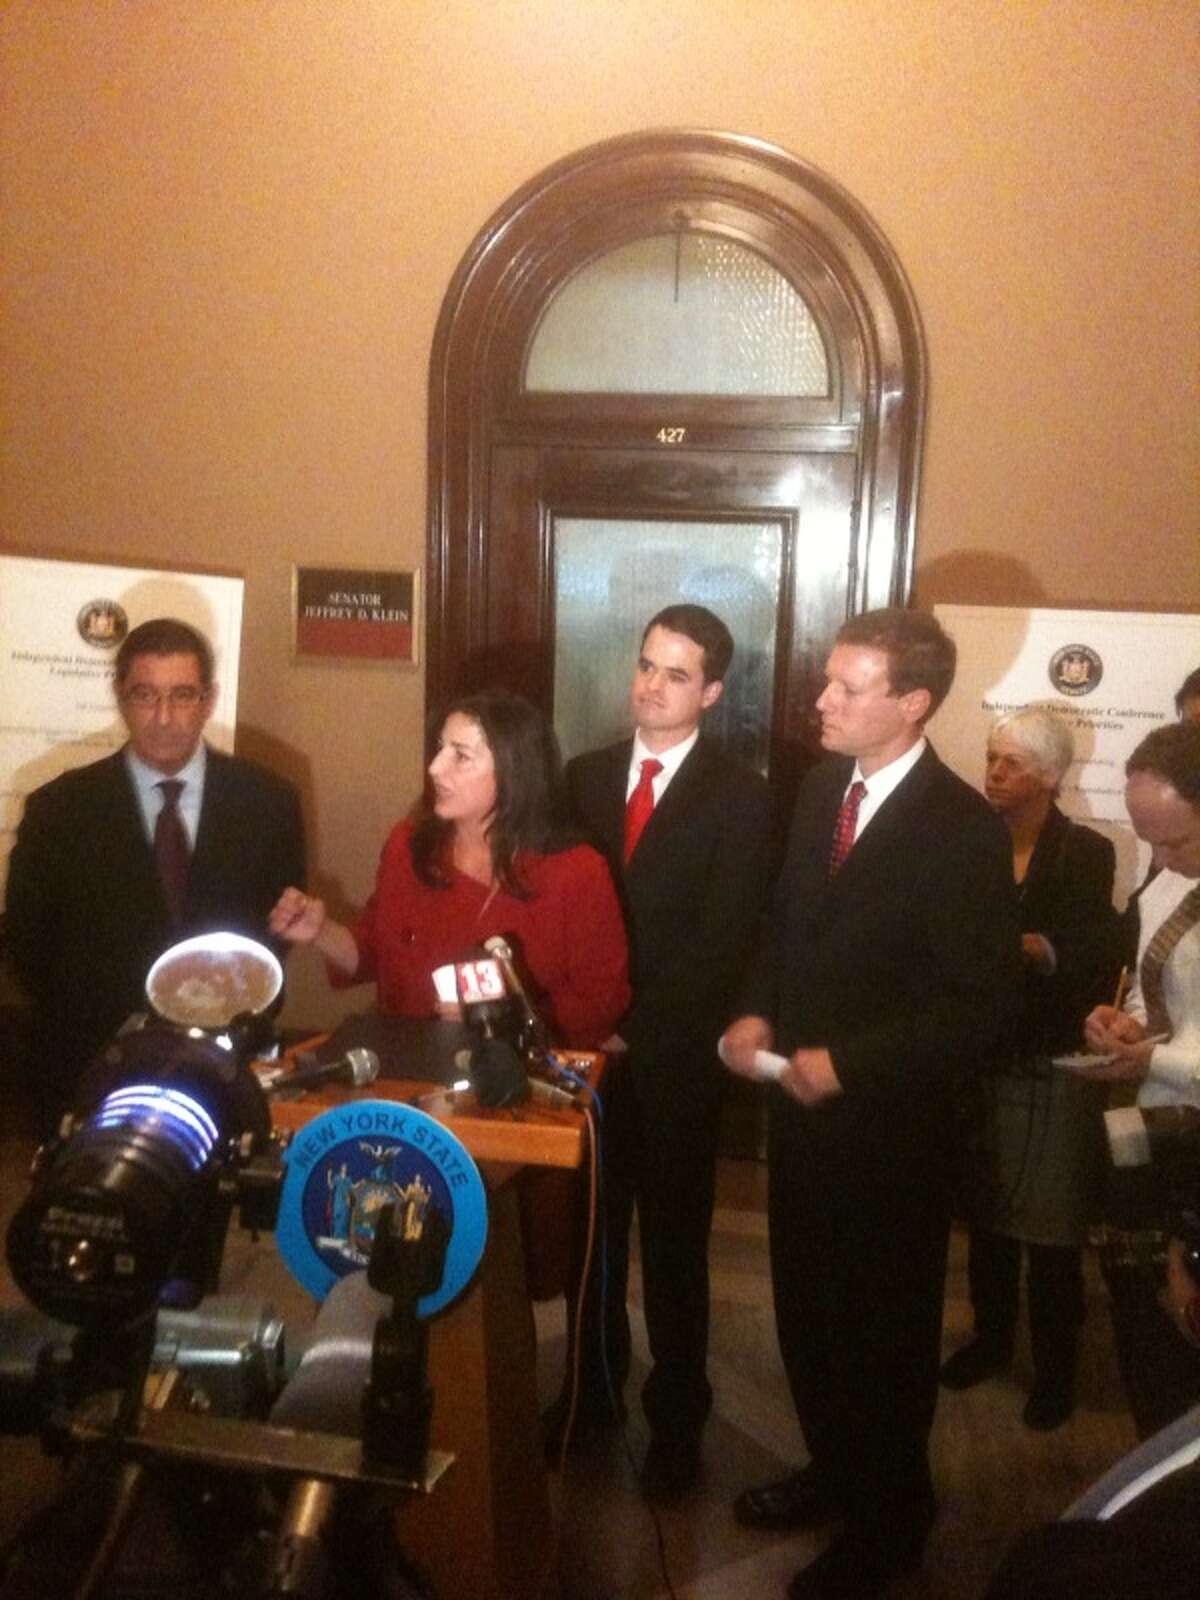 State Sens. Jeff Klein, left, Diane Savino, David Carlucci and David Valesky announce their formation of a breakaway Independent Democratic Conference outside Klein's office at the Capitol. (Rick Karlin, Times Union)